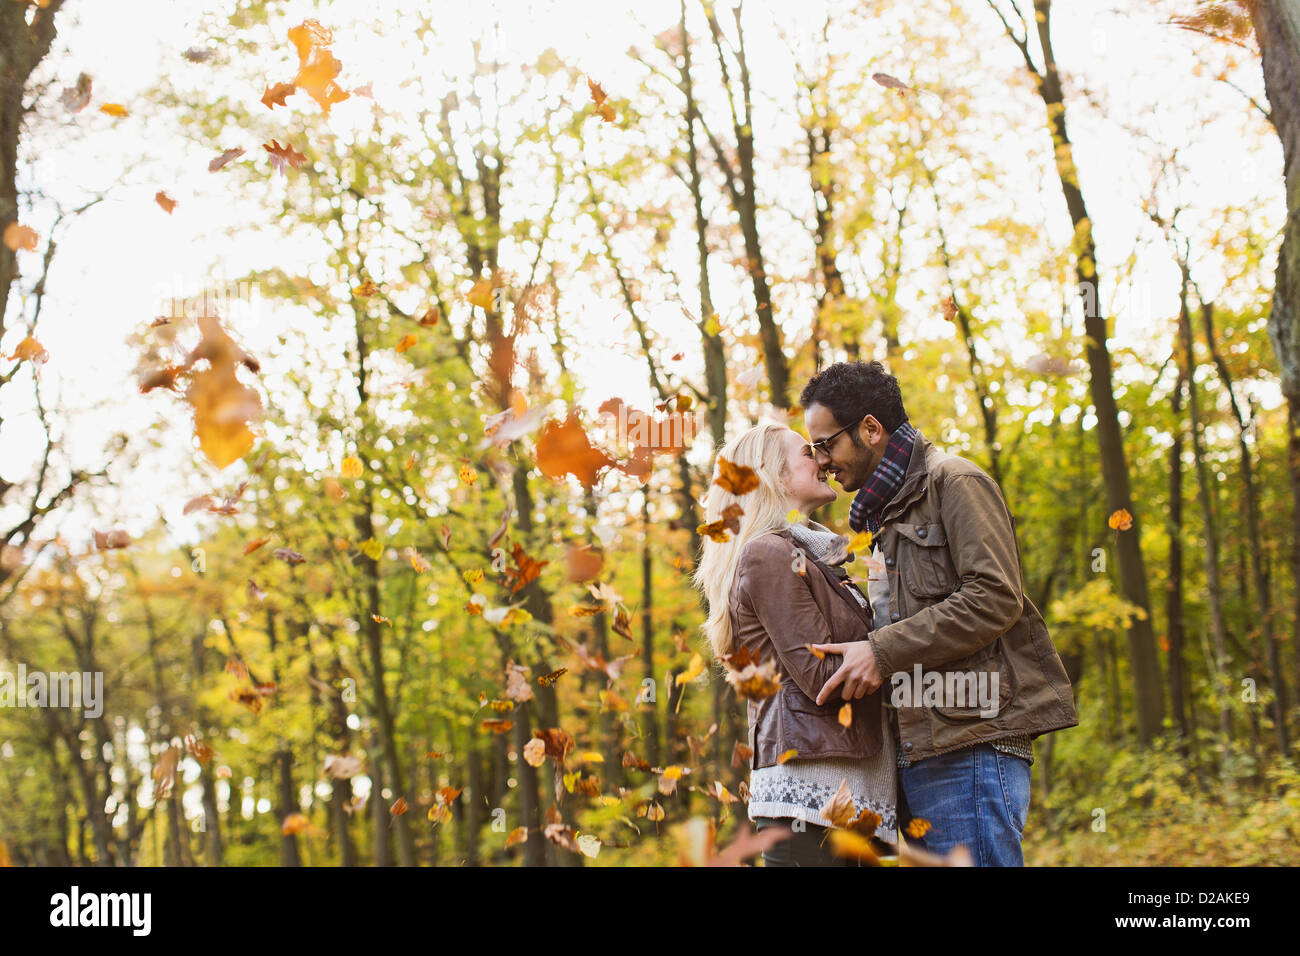 Smiling couple kissing in forest Stock Photo